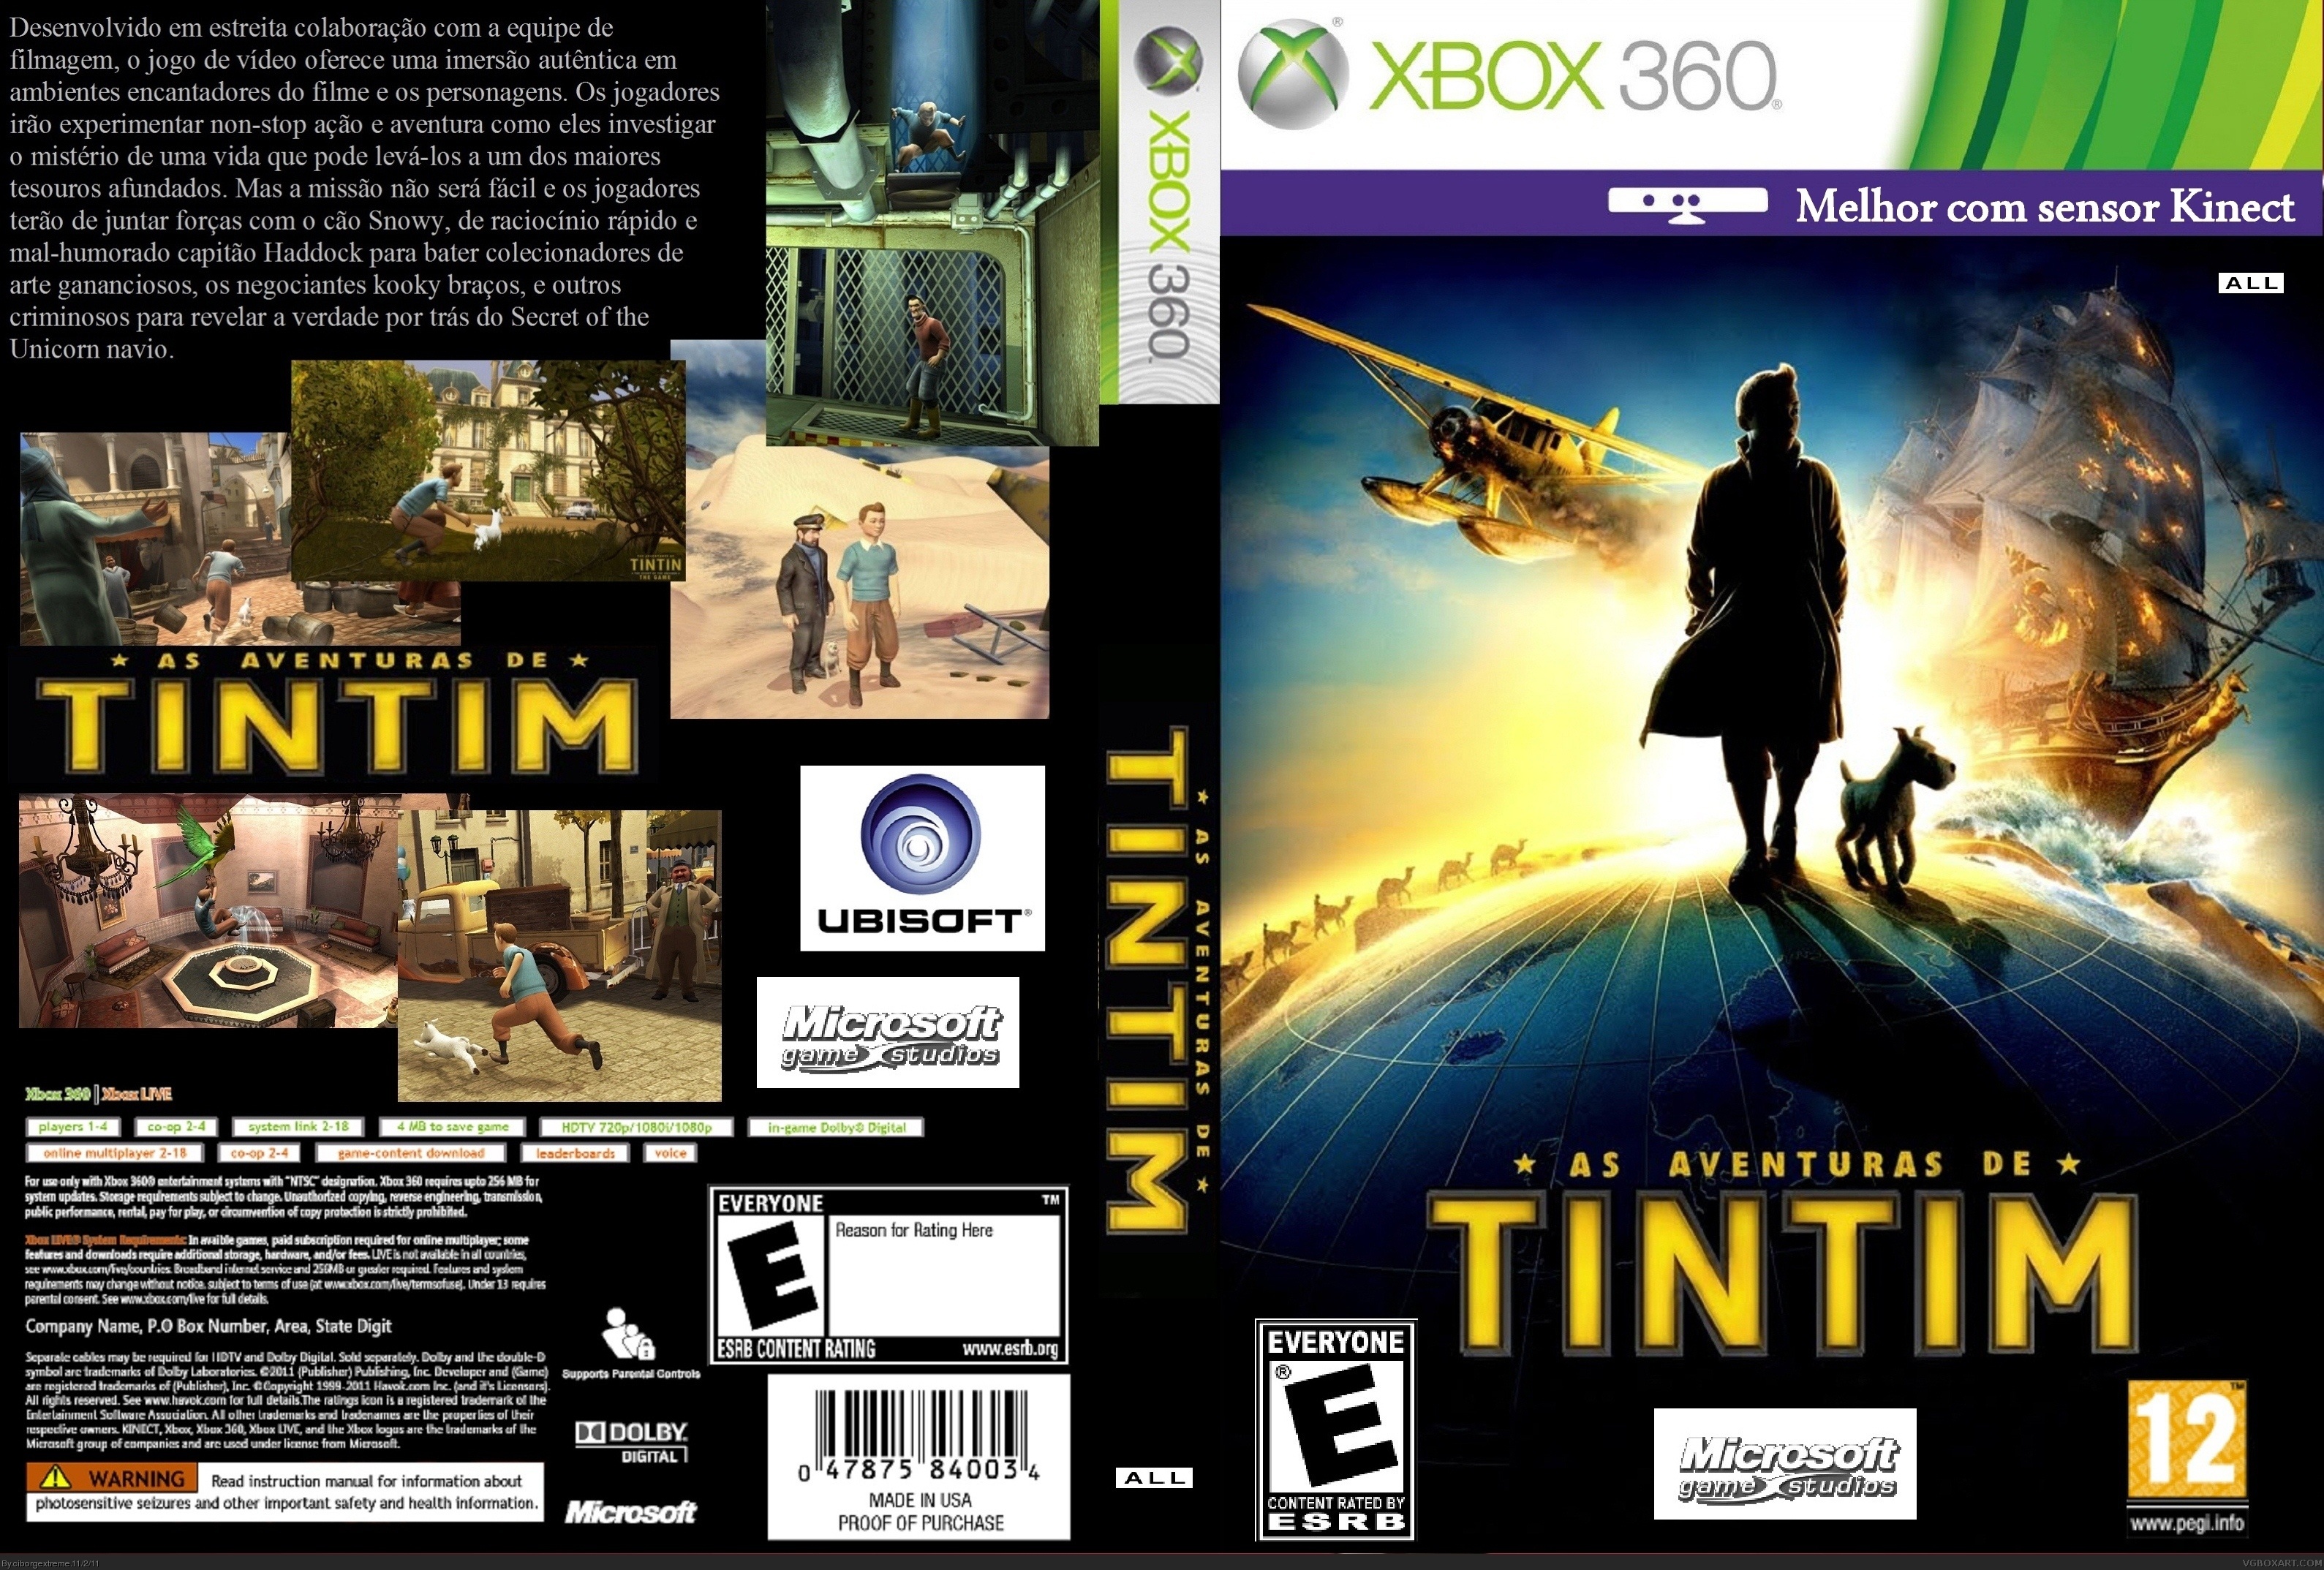 The Adventures of Tintin box cover